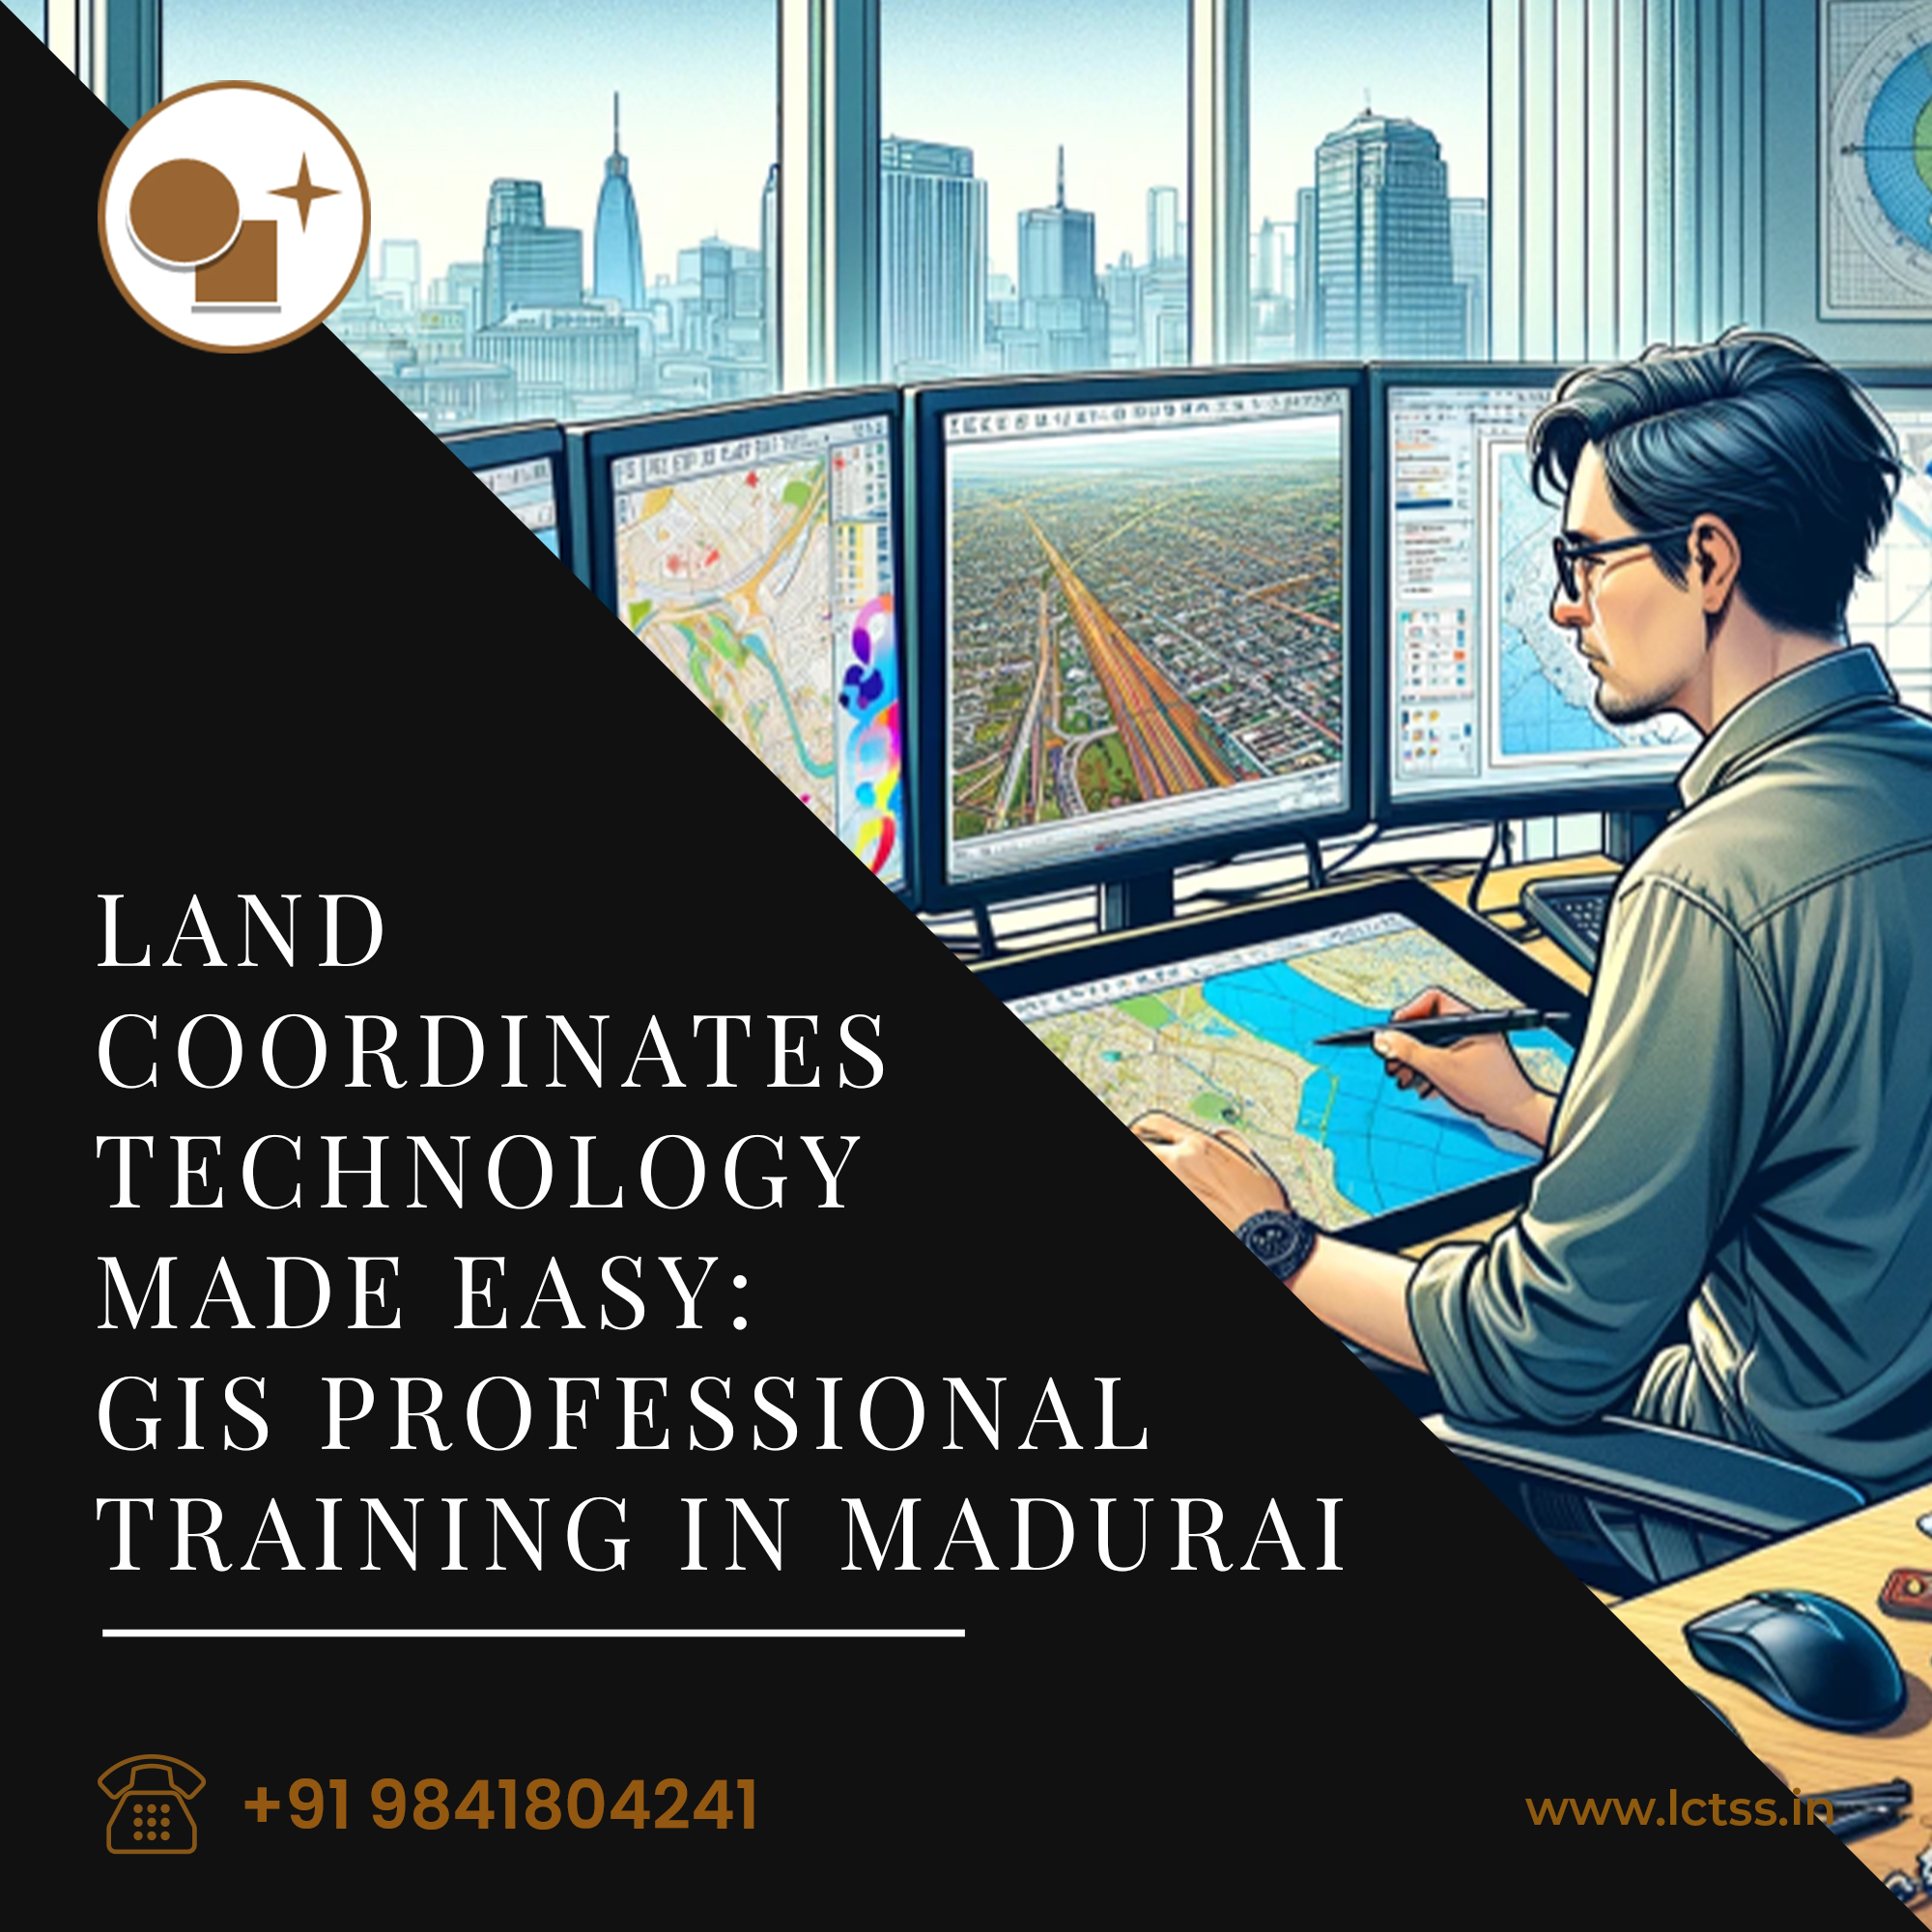 Land Coordinates Technology Made Easy: GIS Professional Training in Madurai